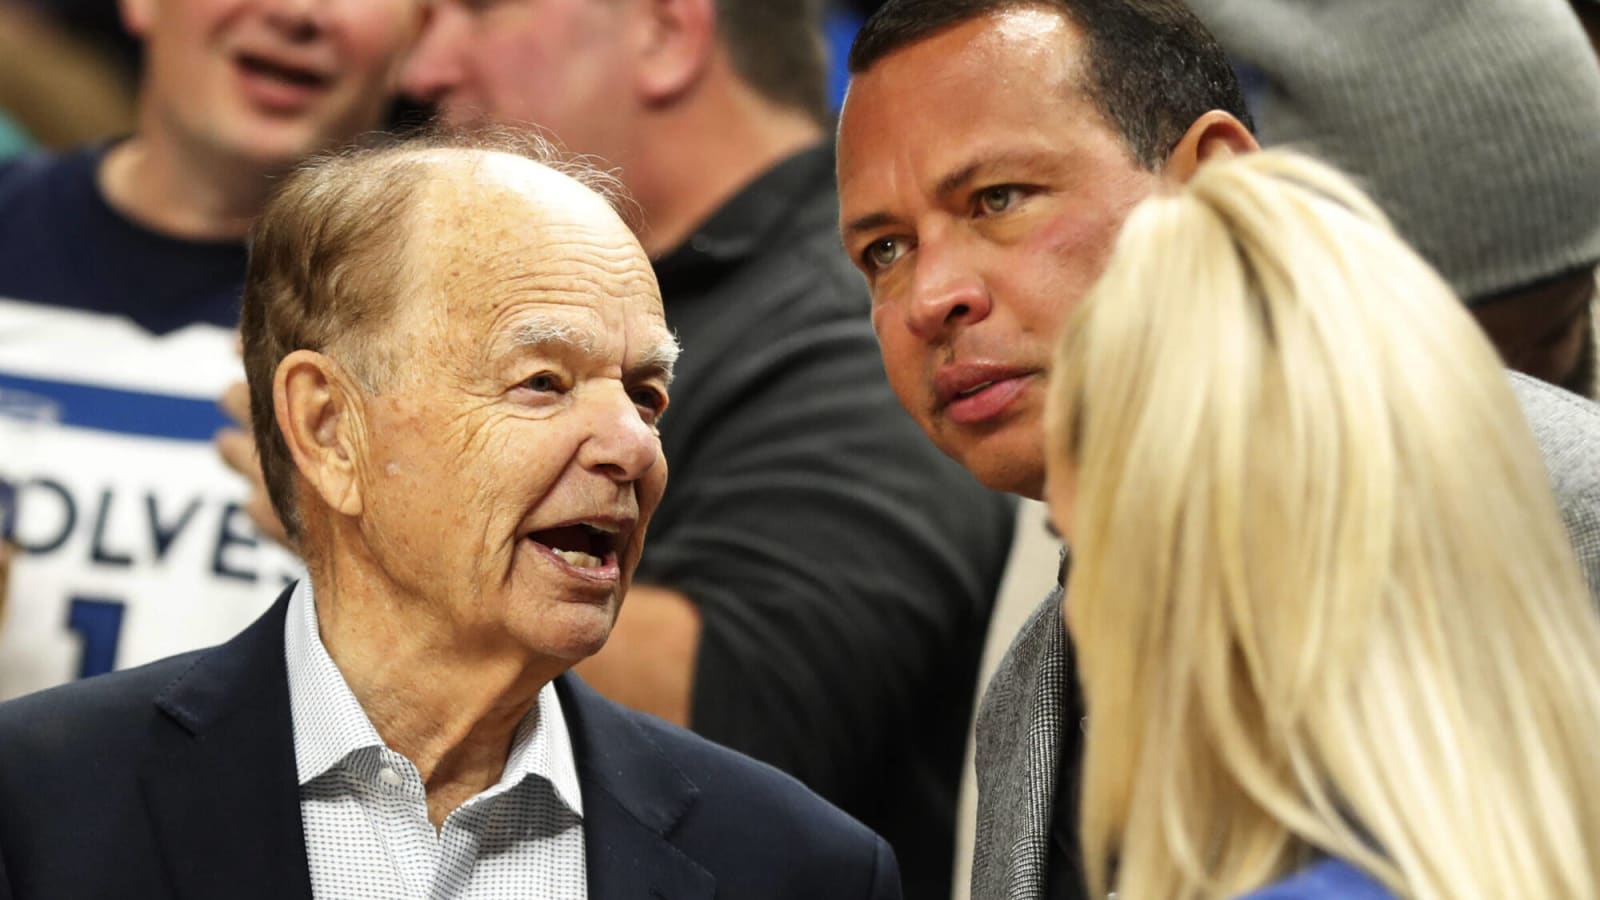 Lore, A-Rod Contend Deal for Timberwolves Still on; Taylor Says They Can Keep Minority Shares